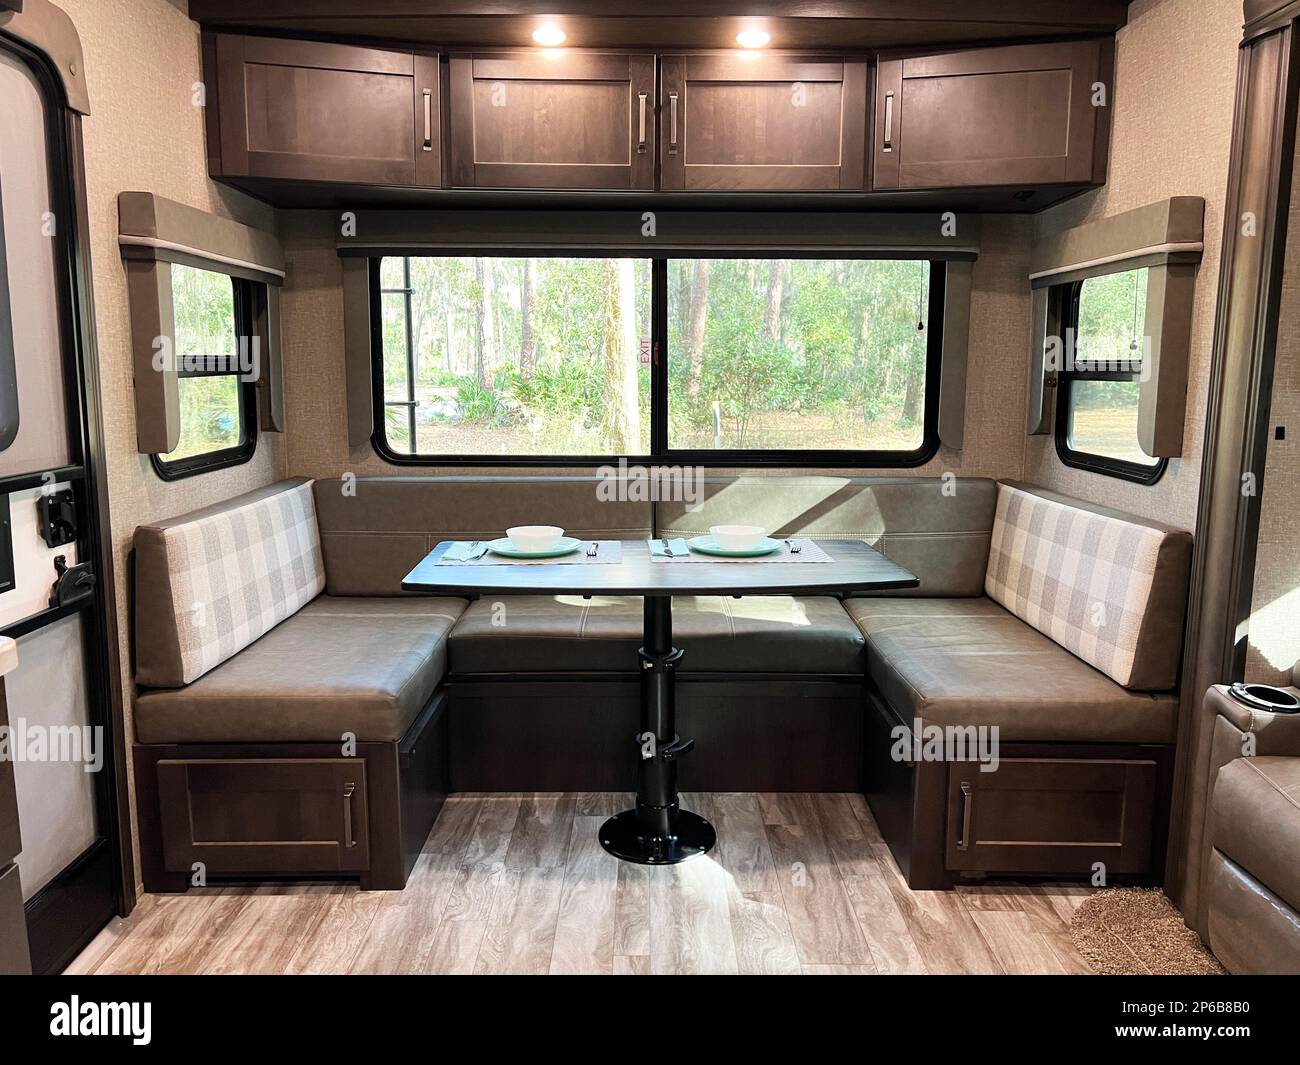 Perfect for remote work, the modern, clean design of this fifth wheel travel trailer shows the dining area with storage and a huge picture window. Stock Photo